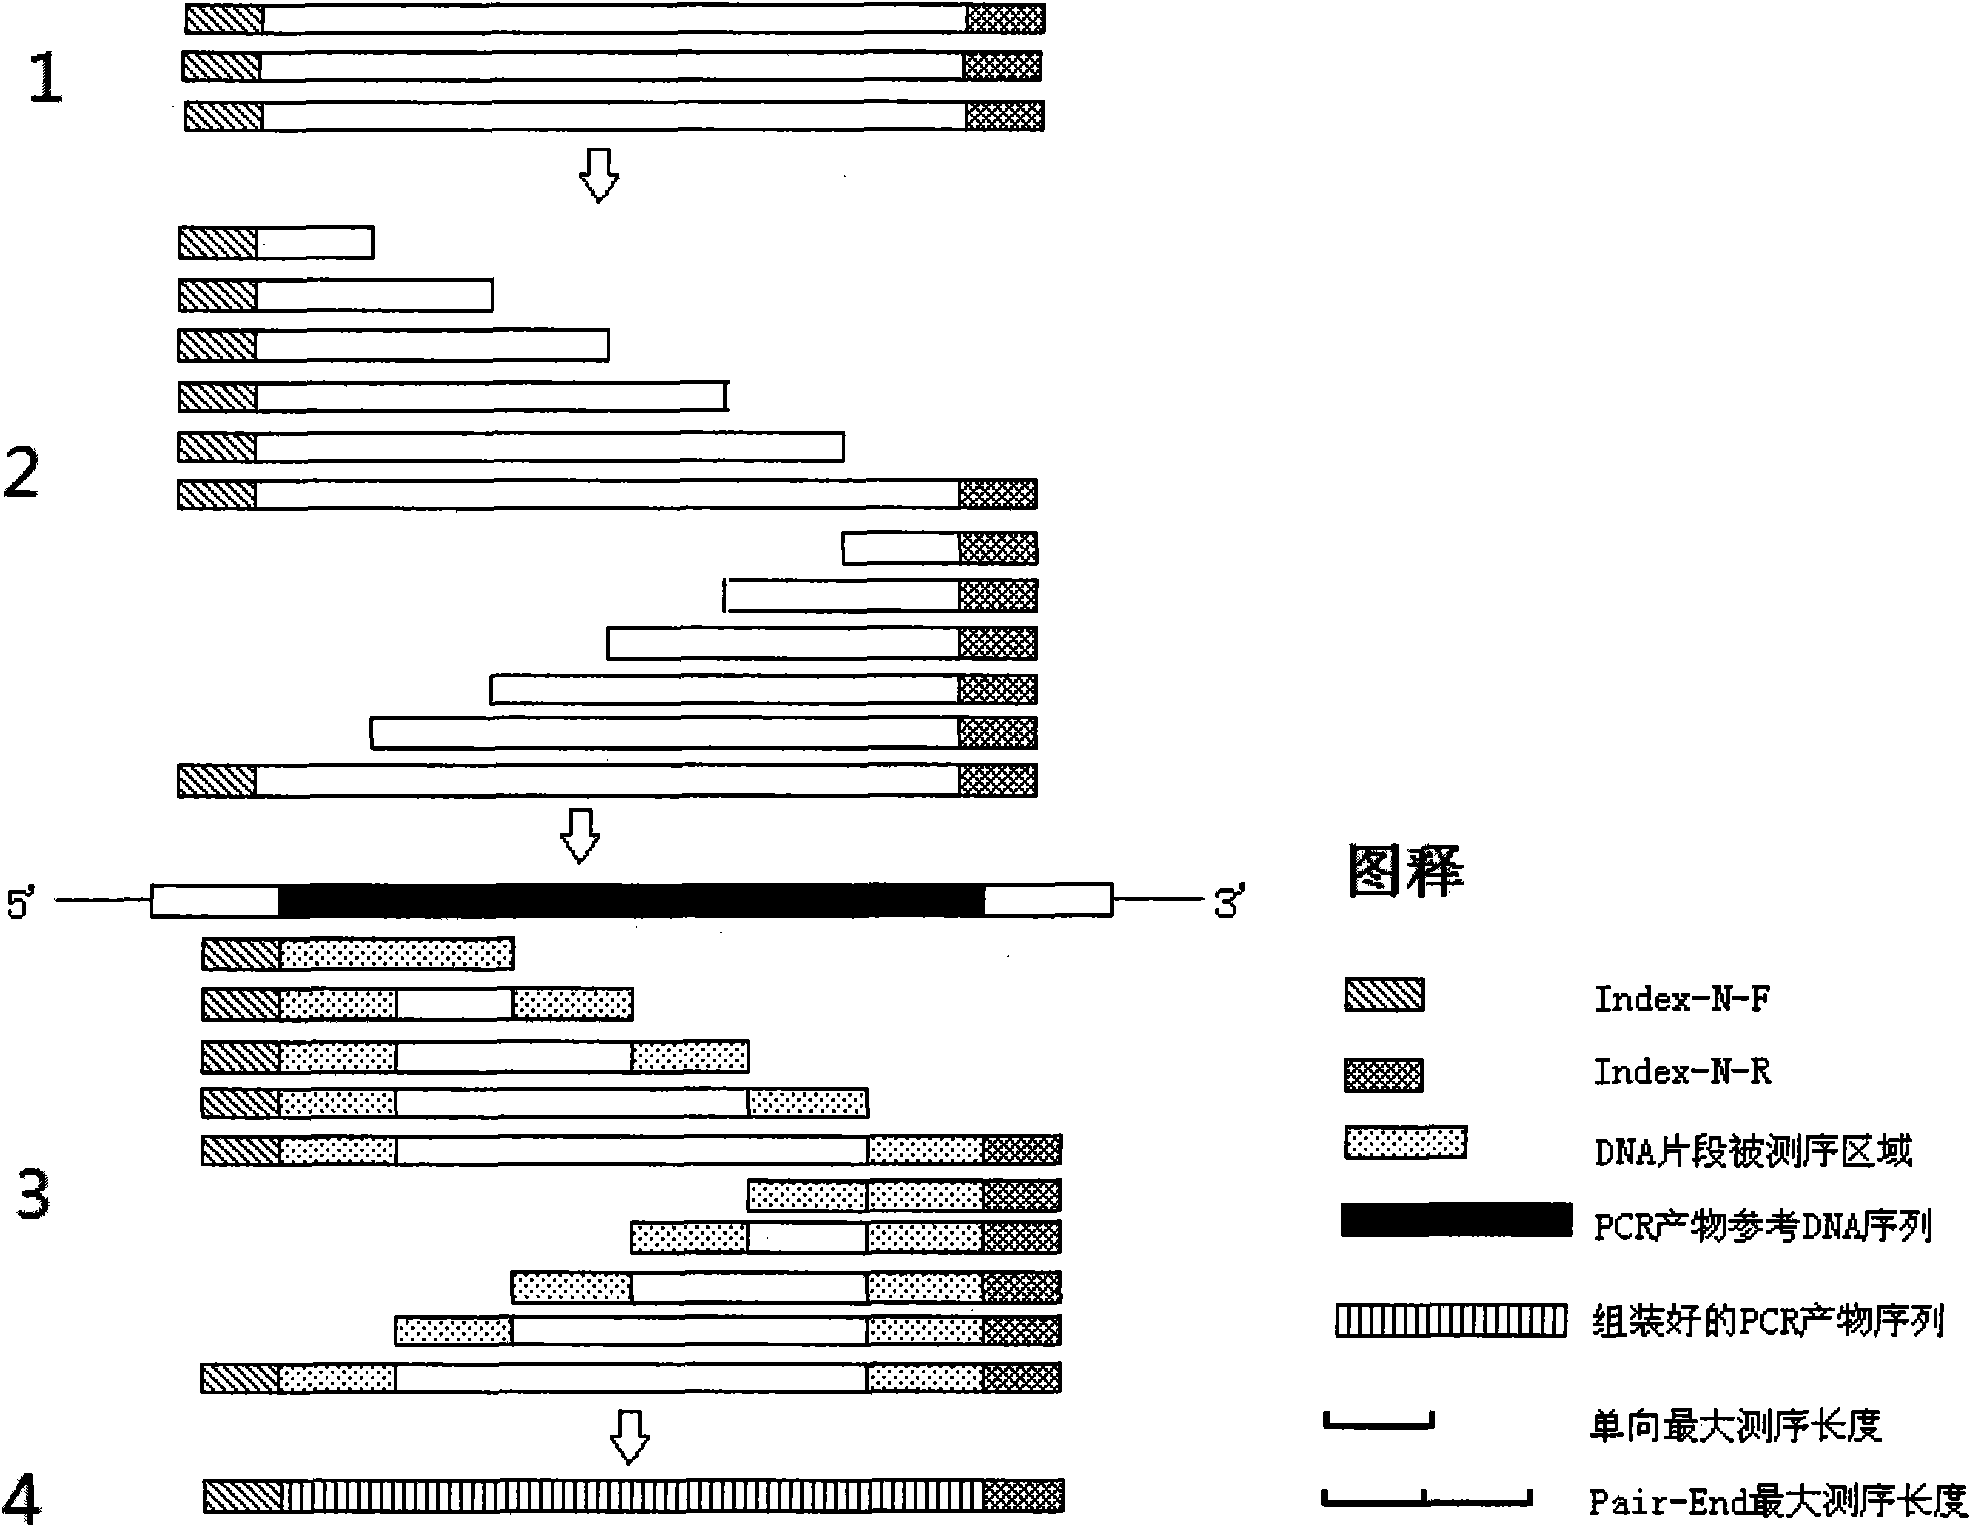 DNA molecular label technology and DNA incomplete interrupt policy-based PCR sequencing method